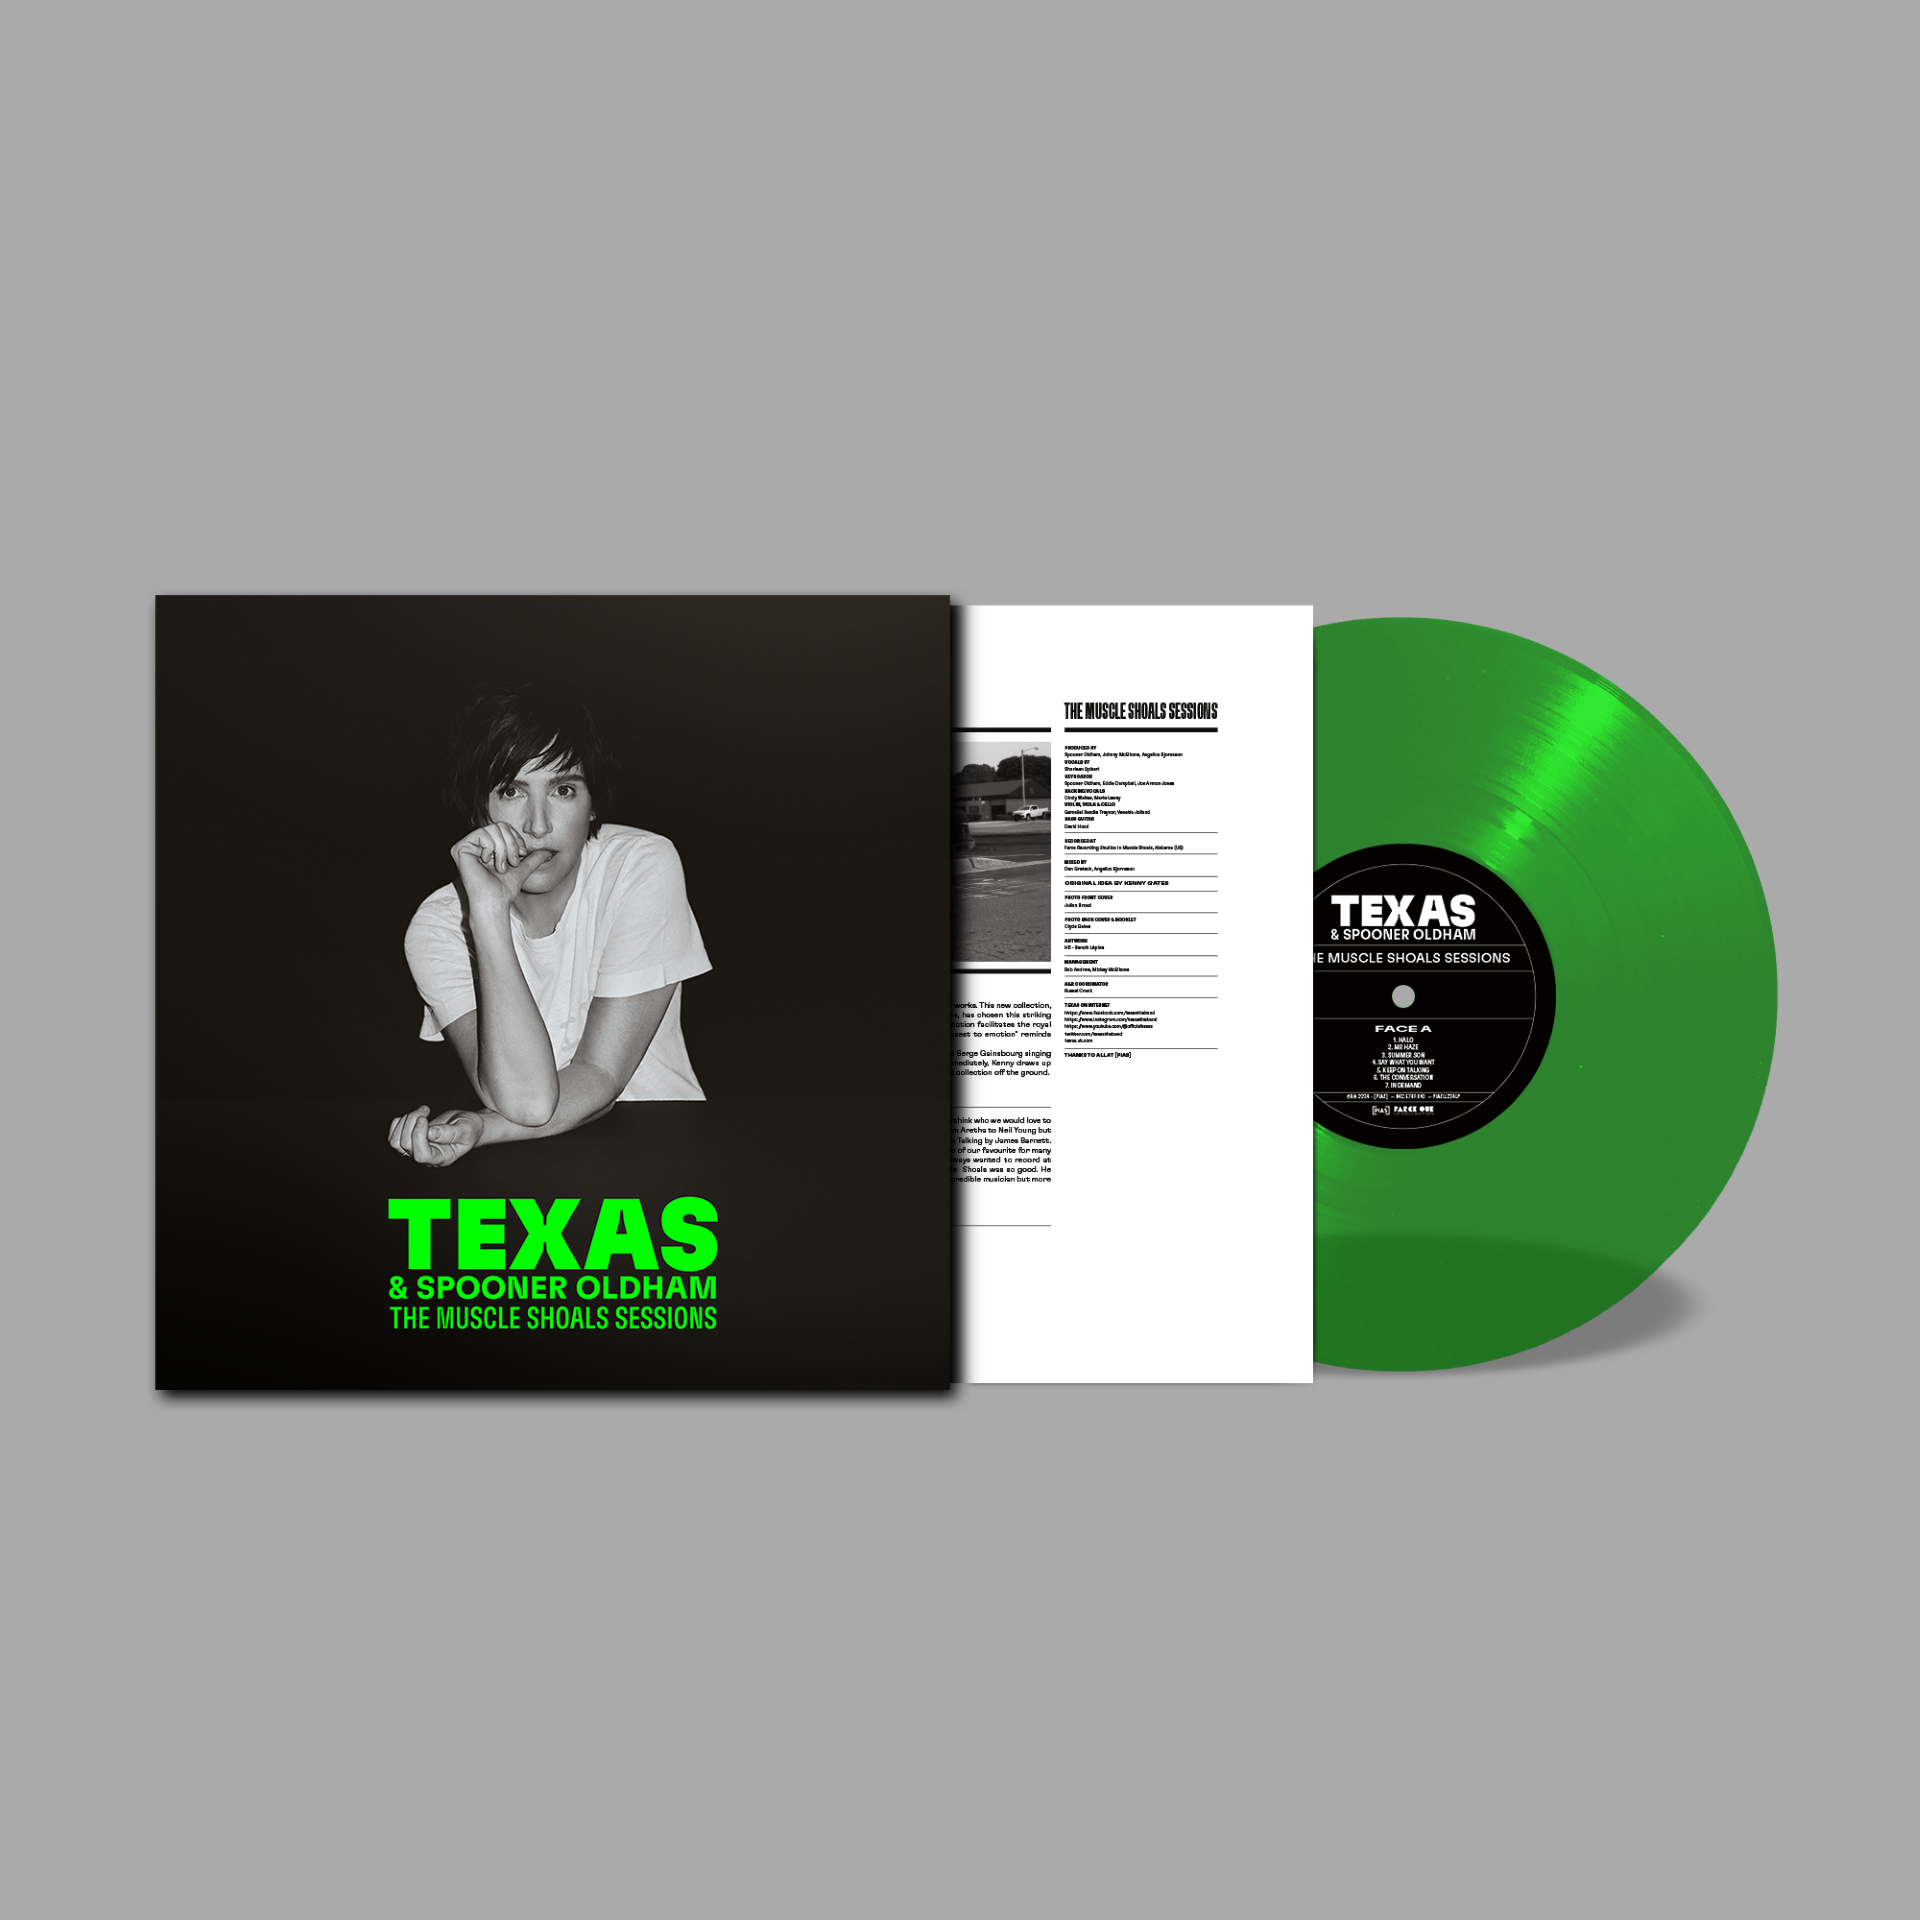 Texas, Spooner Oldham - The Muscle Shoals Sessions: Translucent Green Vinyl LP